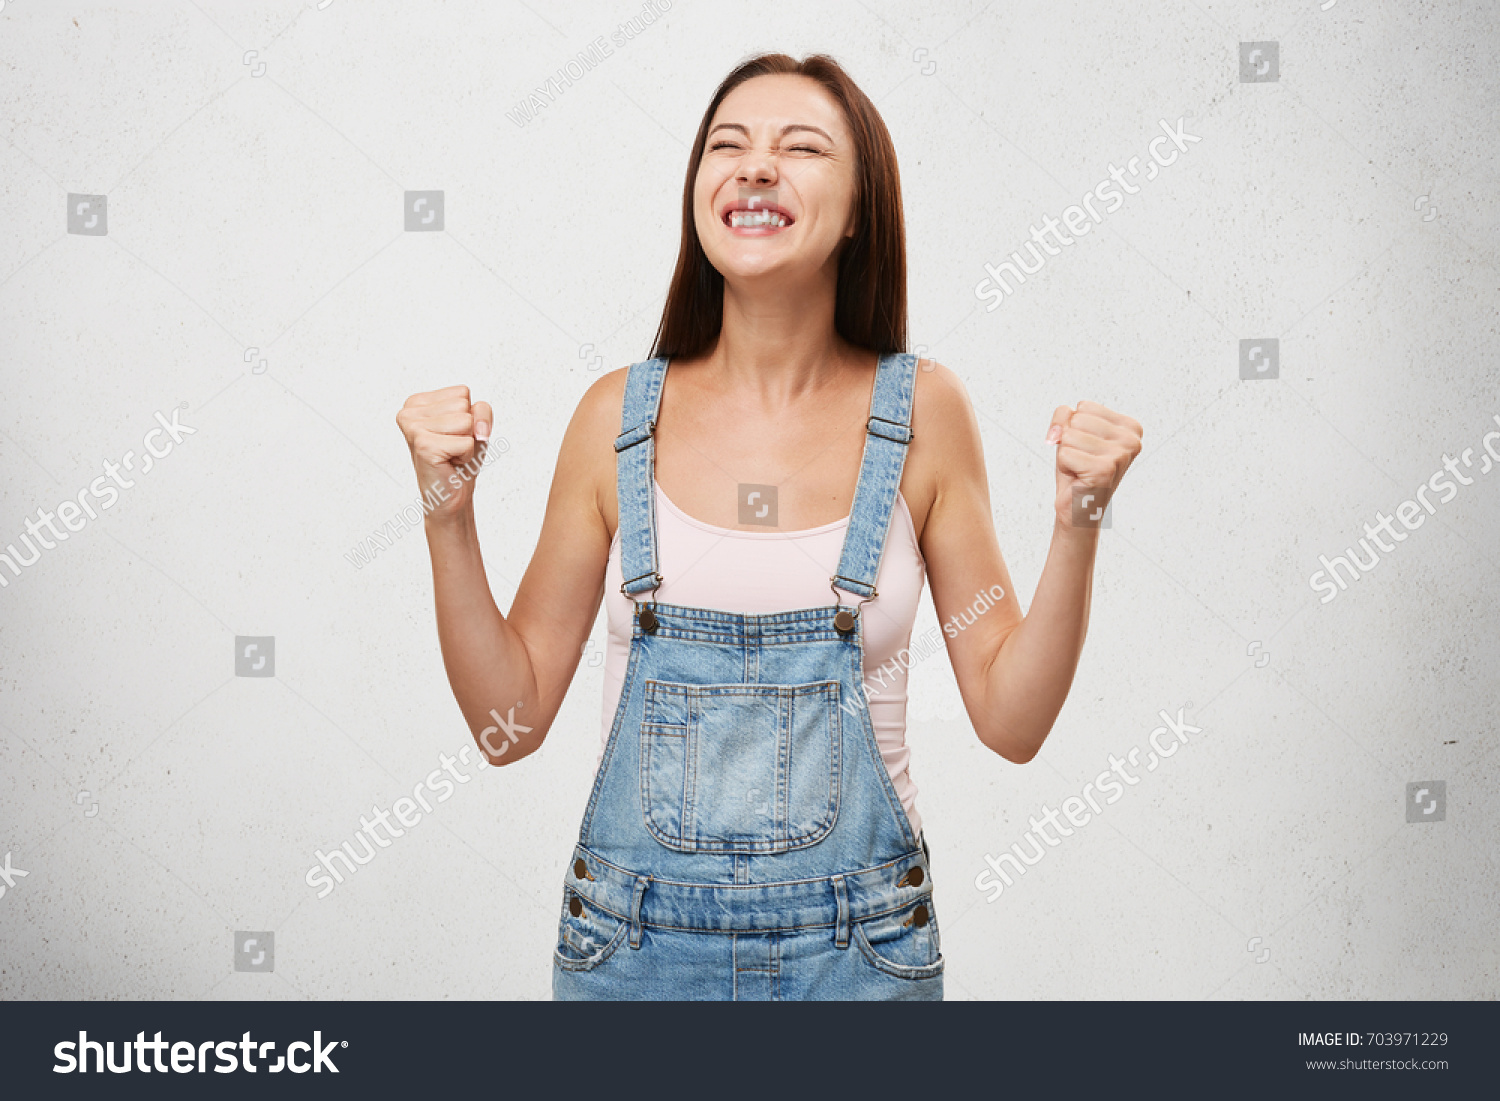 People, success, winning, victory, excitement, goals, determination and achievement concept. Joyful excited lucky student woman cheering, celebrating success, screaming yes with clenched fists #703971229